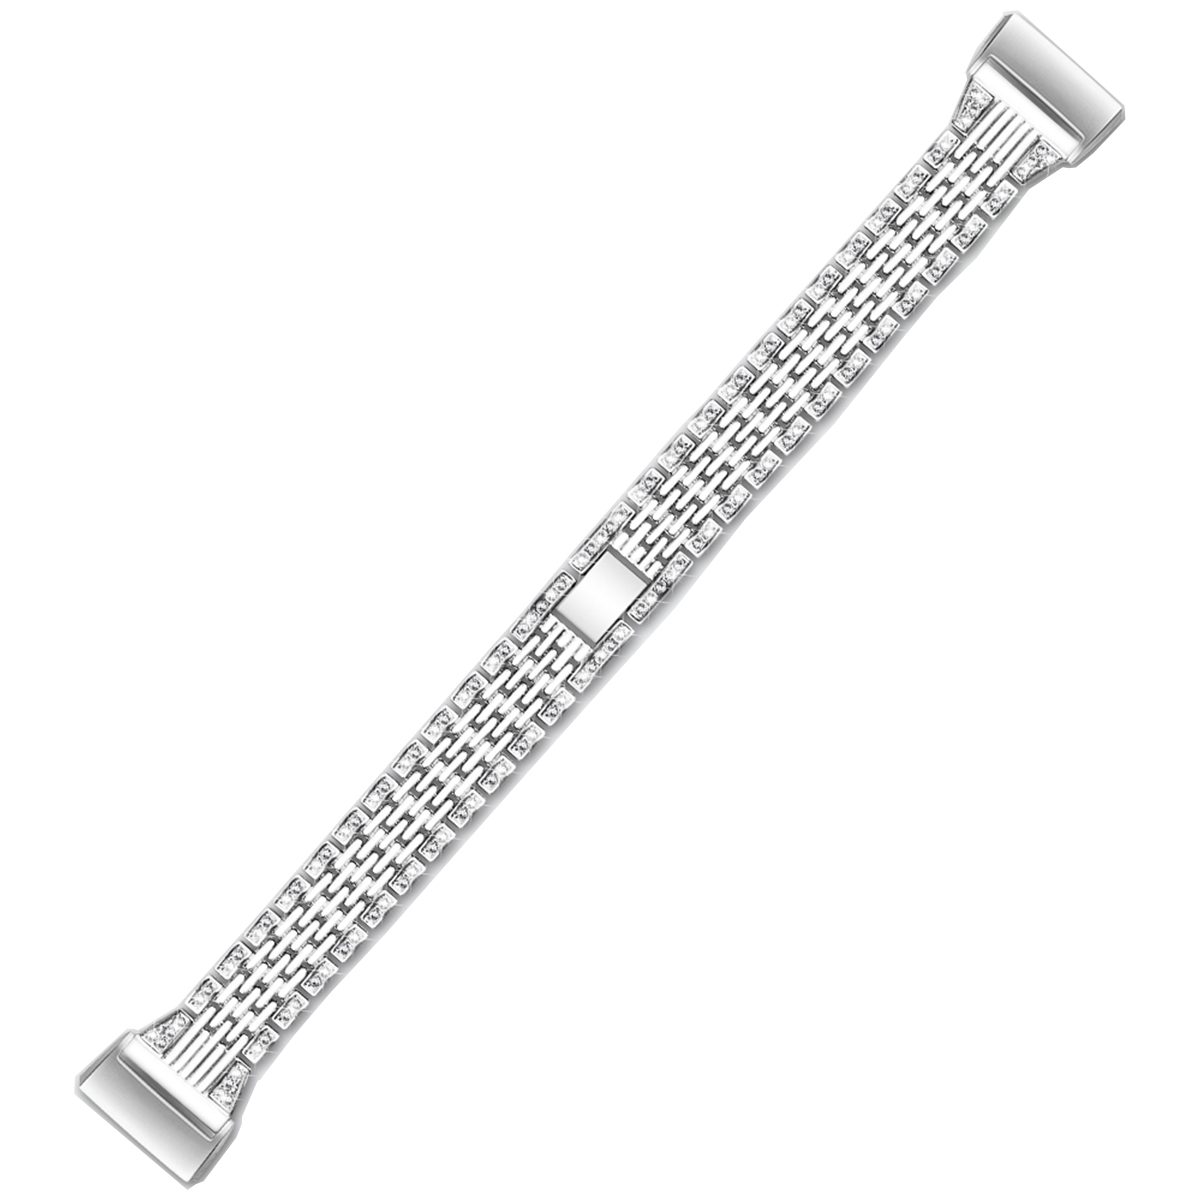 Luxury-Stainles-Steel-Watch-Band-Watch-Strap-Replacement-for-Fitbit-Charge-3-1534078-9